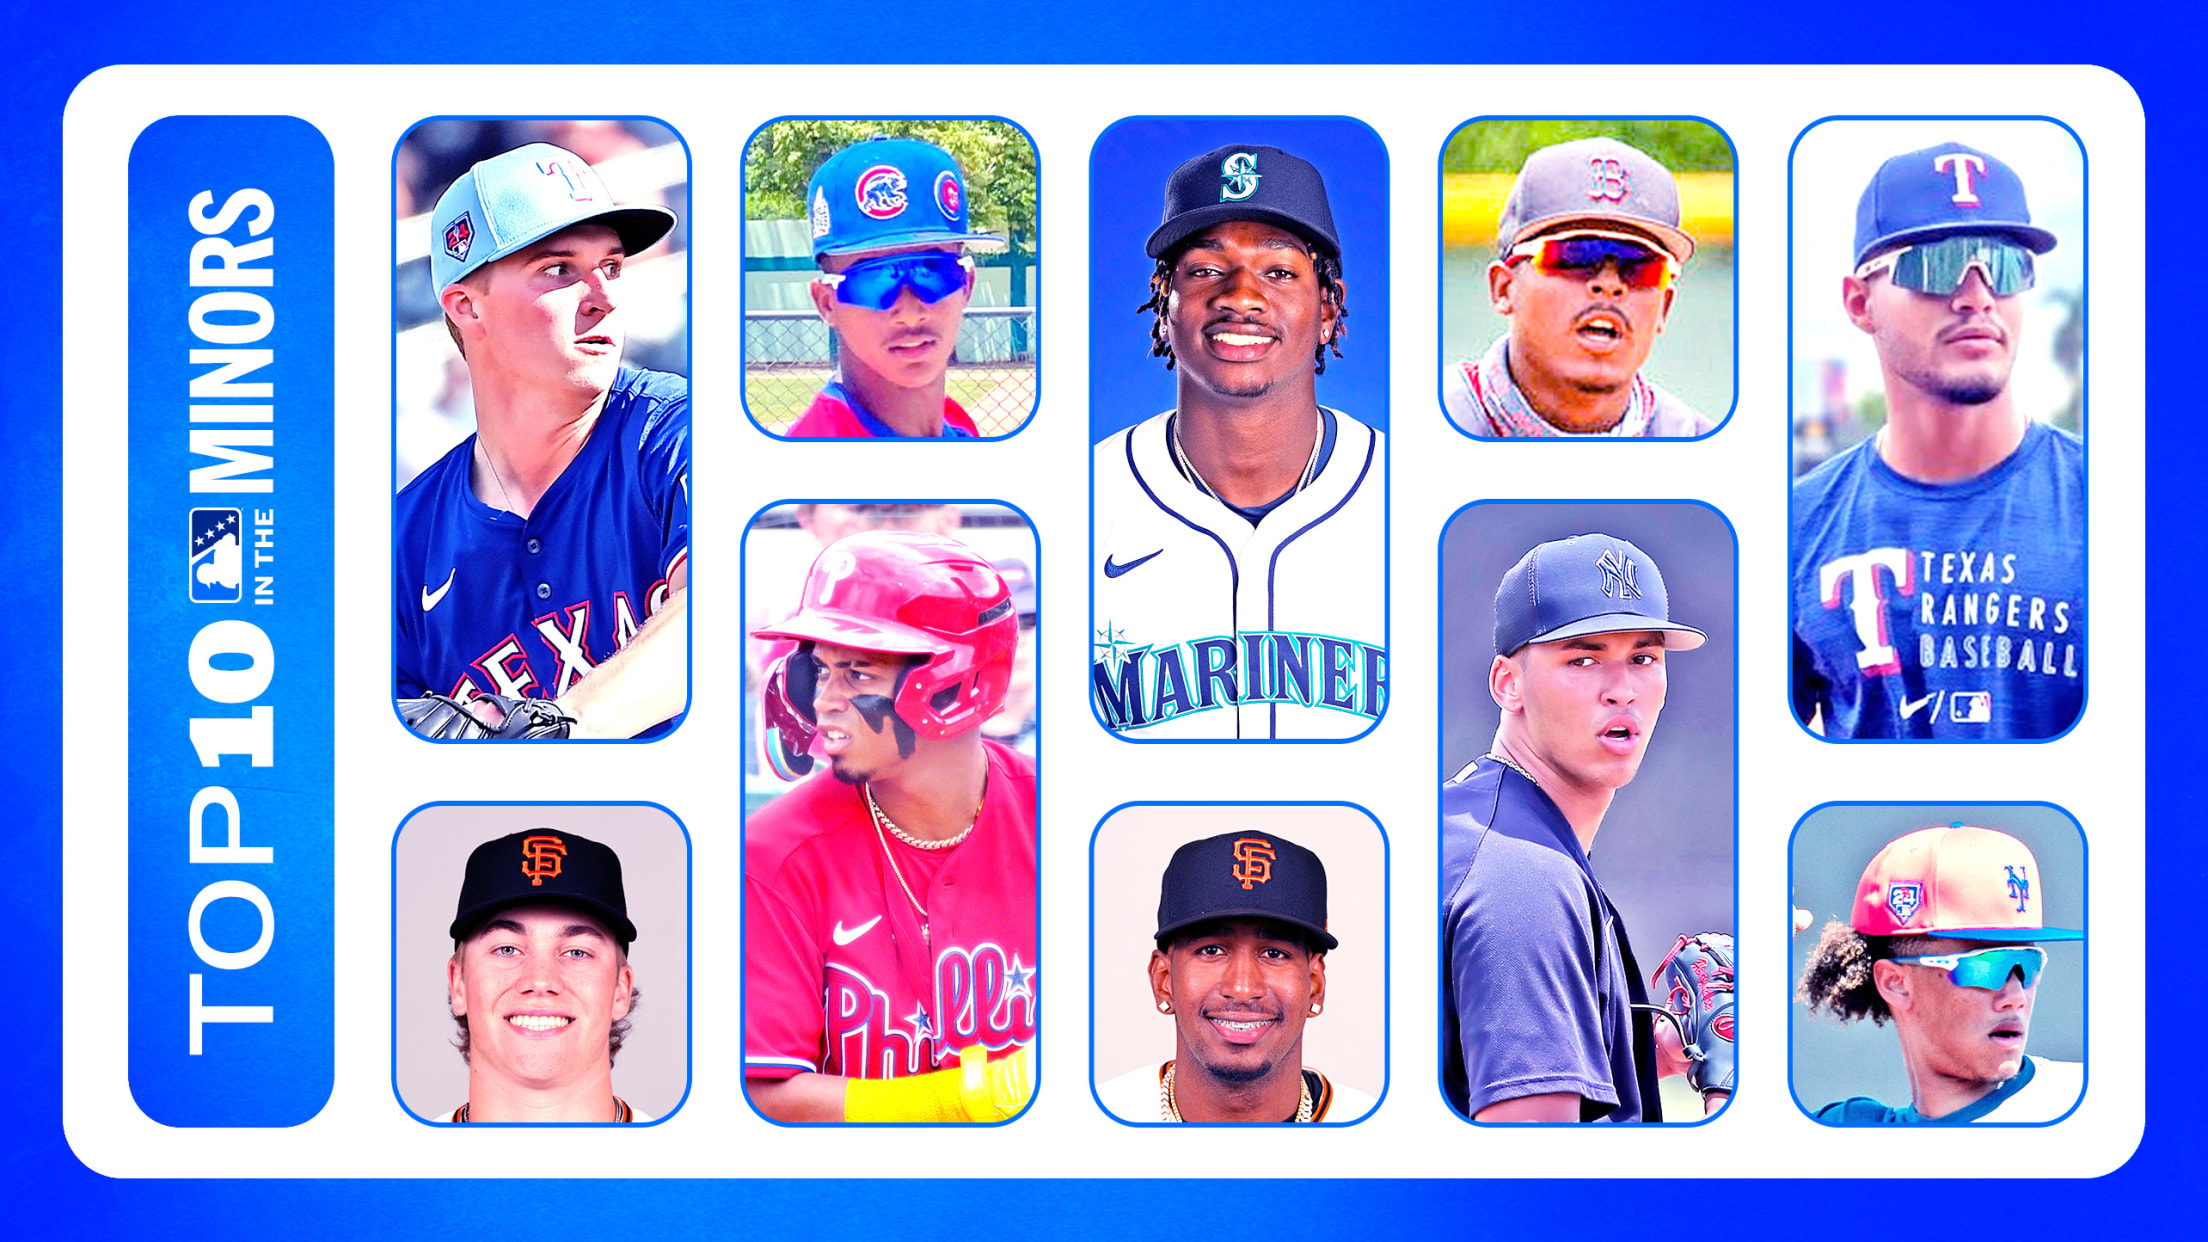 Top 10 prospects in the low Minors